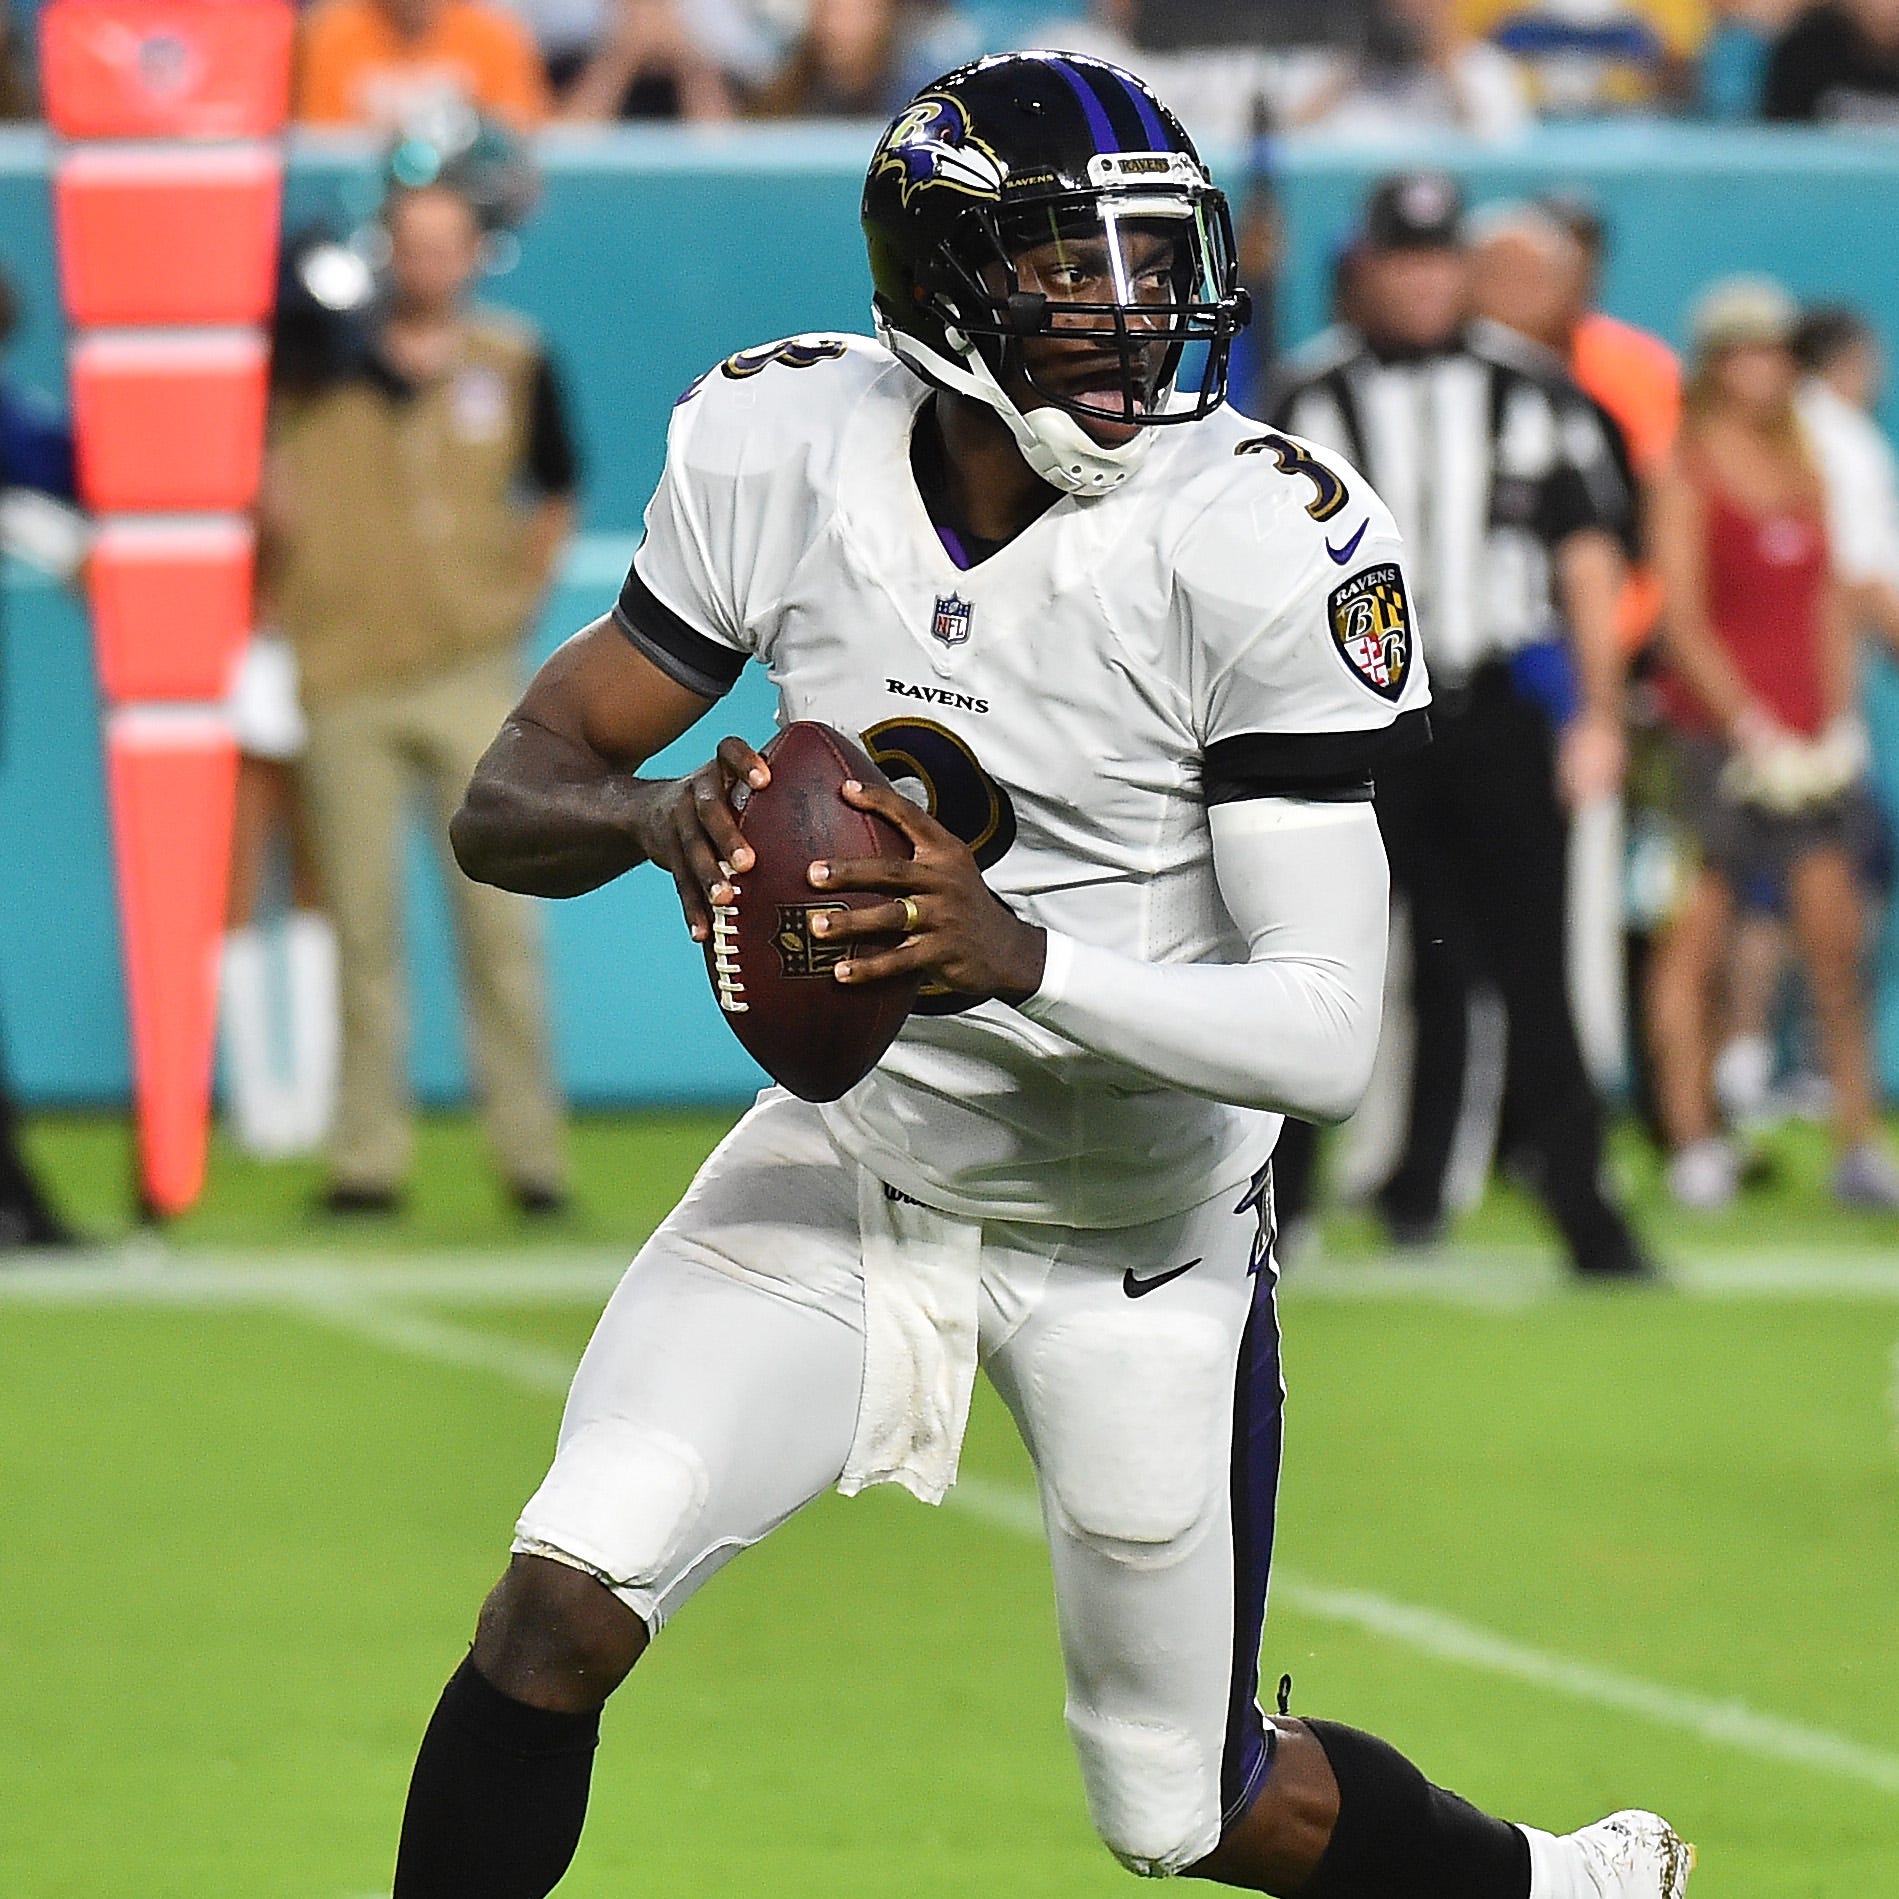 Baltimore Ravens quarterback Robert Griffin III (3) drops back to attempt a pass against the Miami Dolphins during the first half at Hard Rock Stadium.